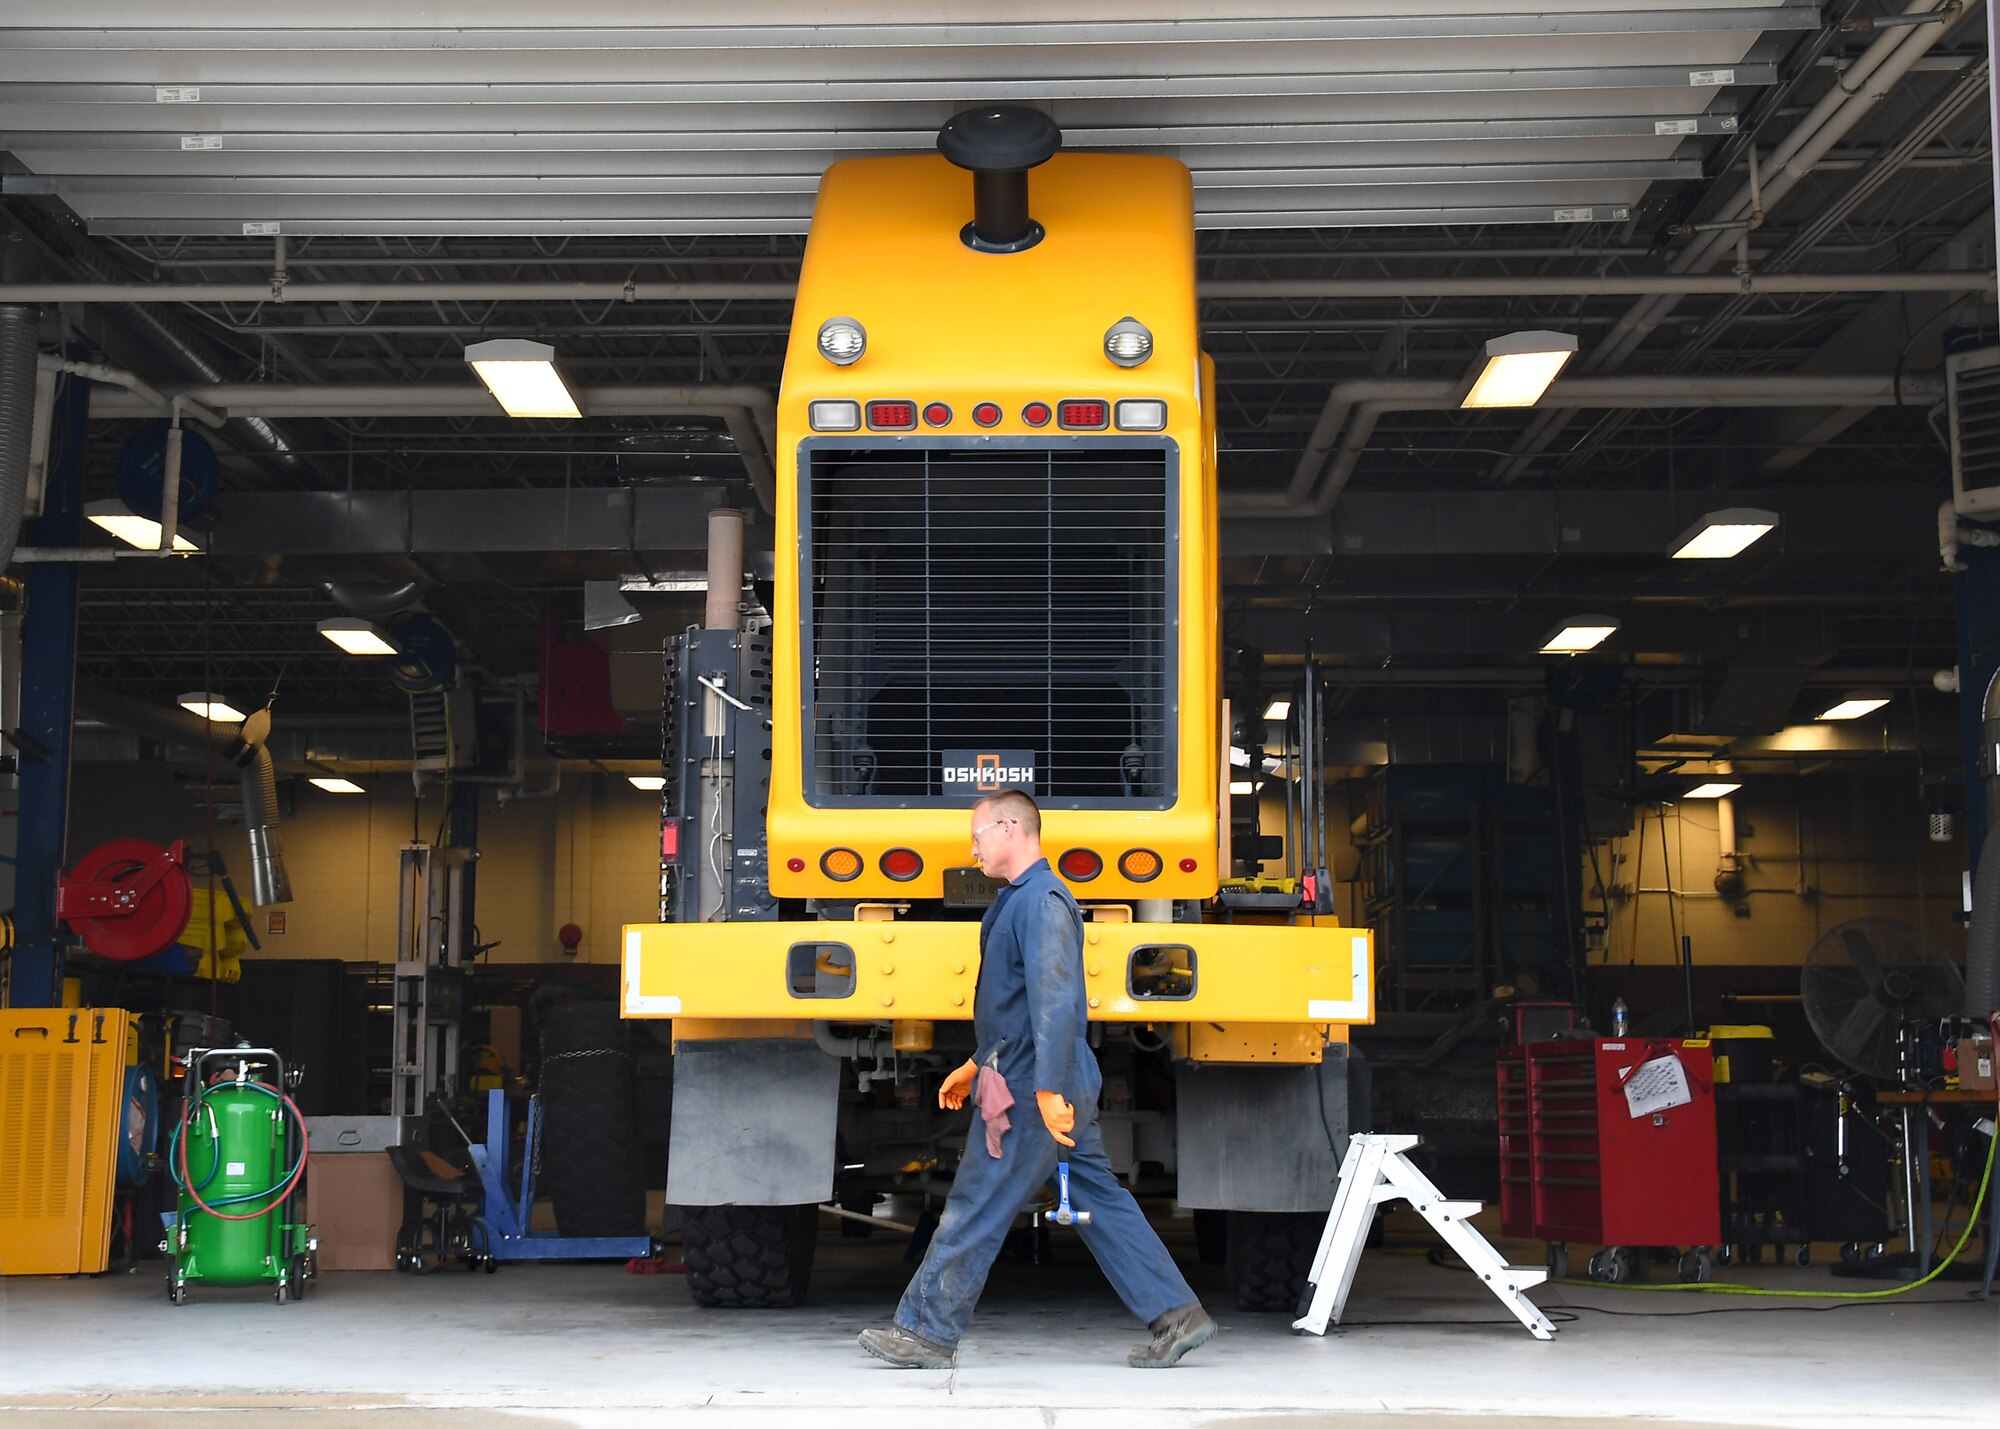 Paul Holien, 319th Logistics Readiness Squadron heavy equipment mobile mechanic, prepares to work on a snow plow August 28, 2018, on Grand Forks Air Force Base, North Dakota. The 319 LRS is essential for the maintenance of vehicles to include snow plows on Grand Forks AFB, which are crucial during winter months. Without the assistance of snow plows to keep snow from accruing on the base roads and flightline, normal operations would be impossible. (U.S. Air Force photo by Airman 1st Class Elora J. Martinez)